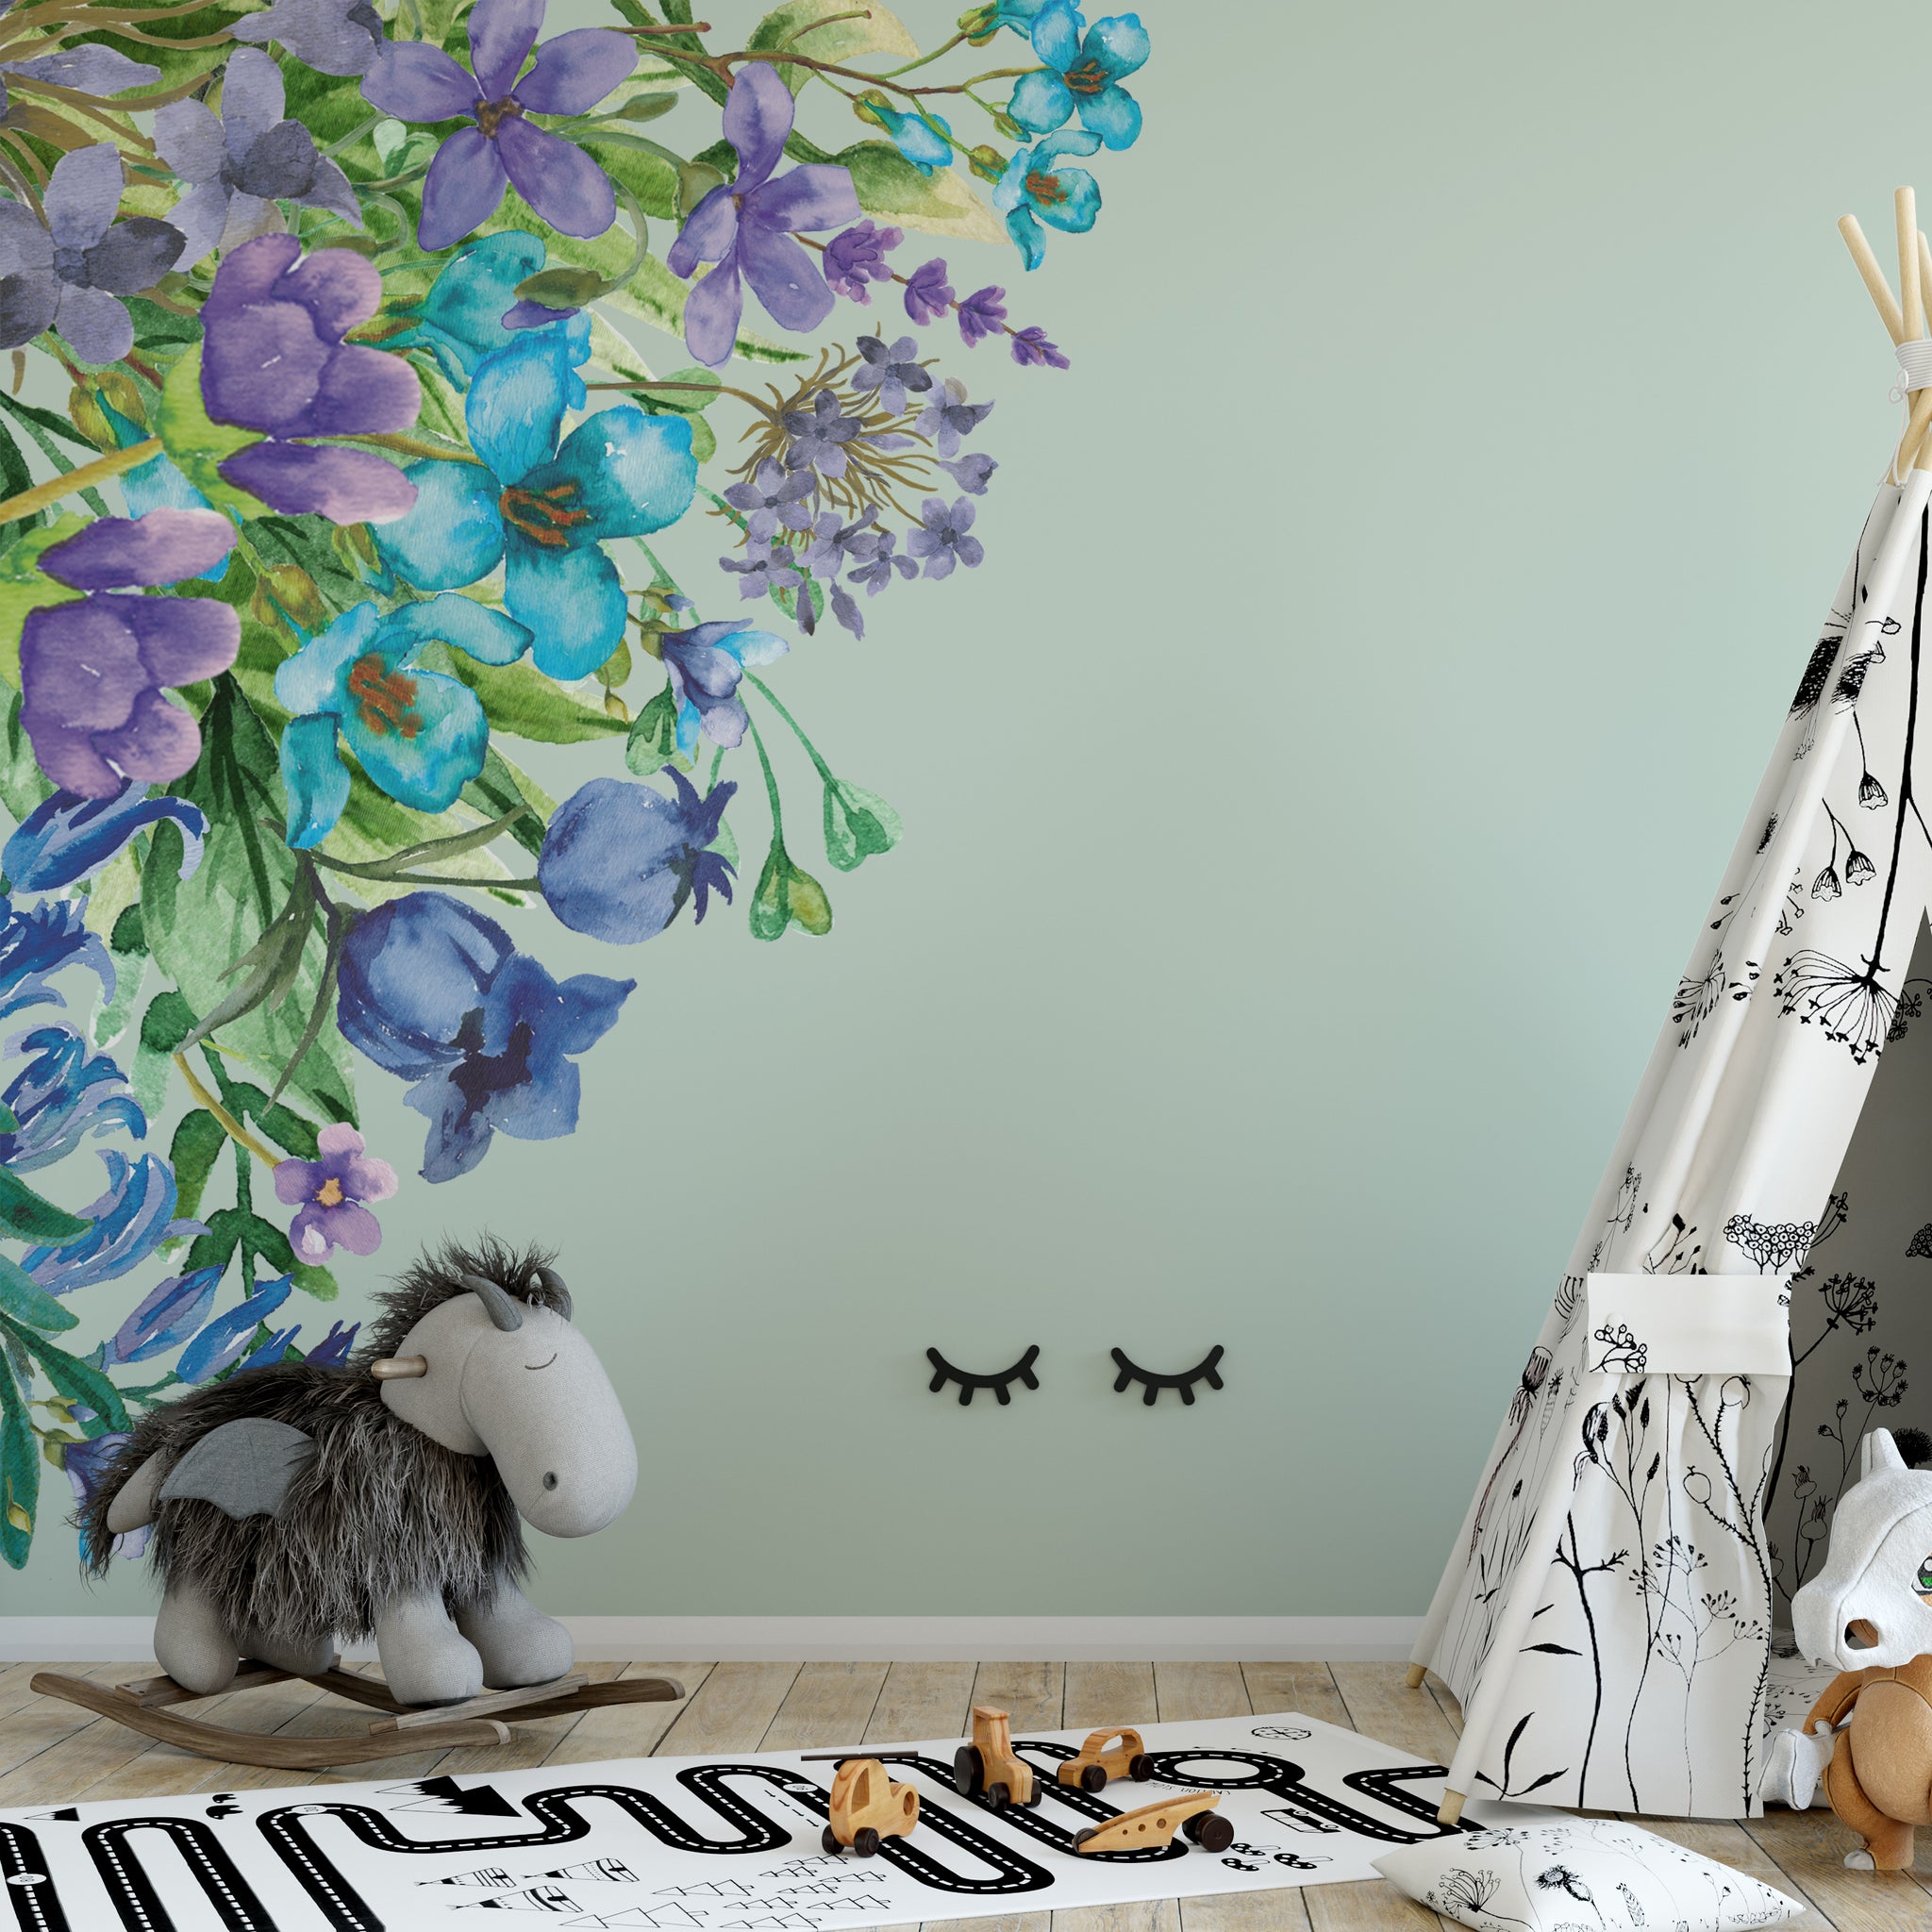 Cute Koala With Flowers Colourful Bedroom Wall Vinyl Sticker Decals s433